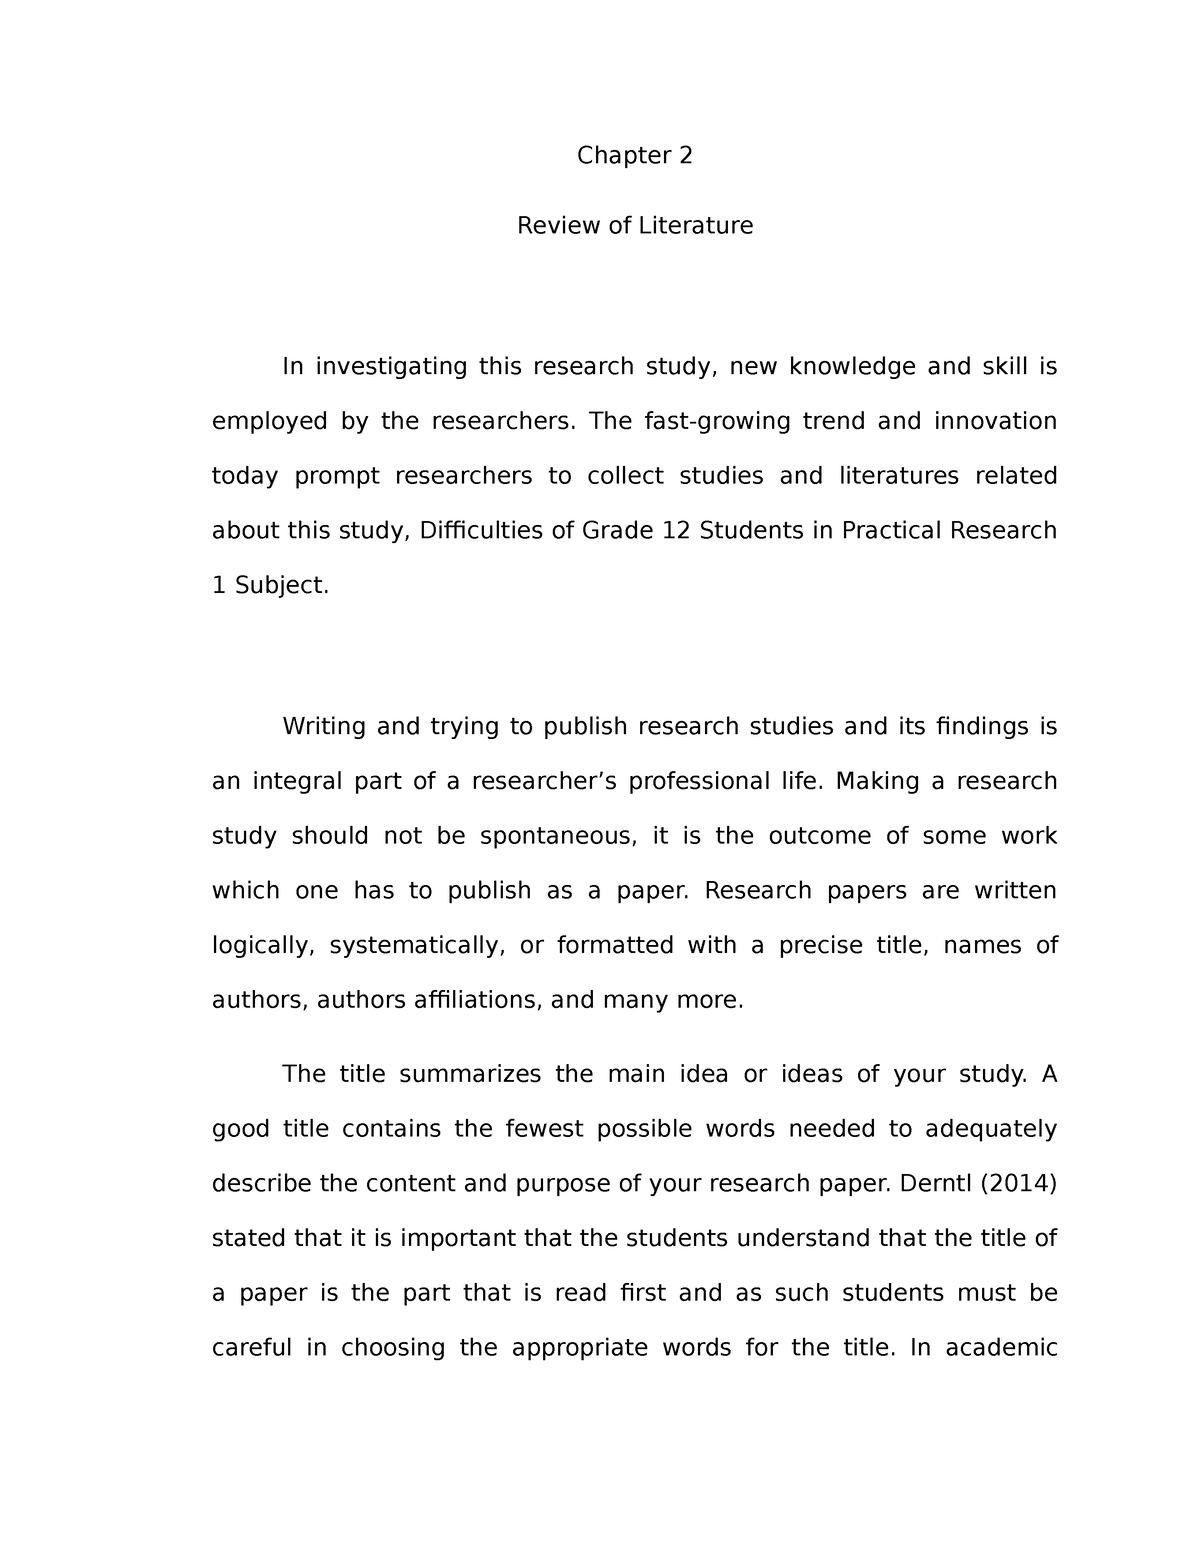 research paper chapter 2